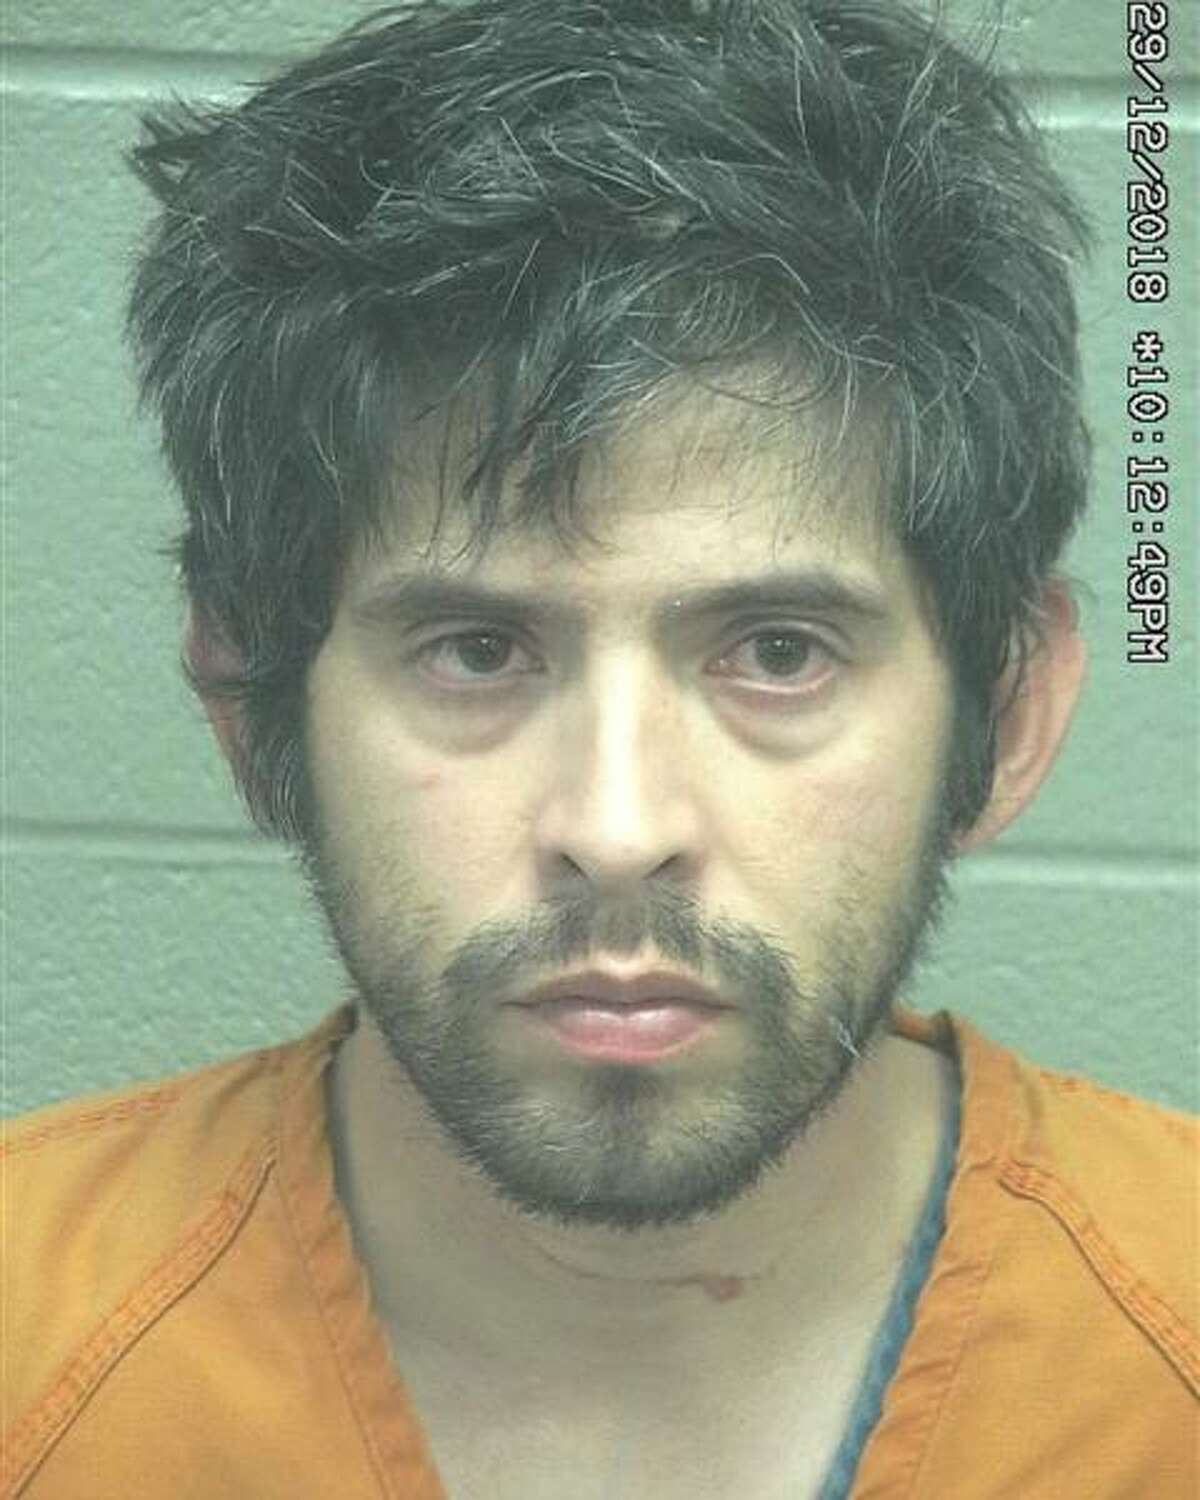 Thomas Gutierrez, 34, was arrested Dec. 29 after he allegedly sexually assaulted a child, according to court documents.